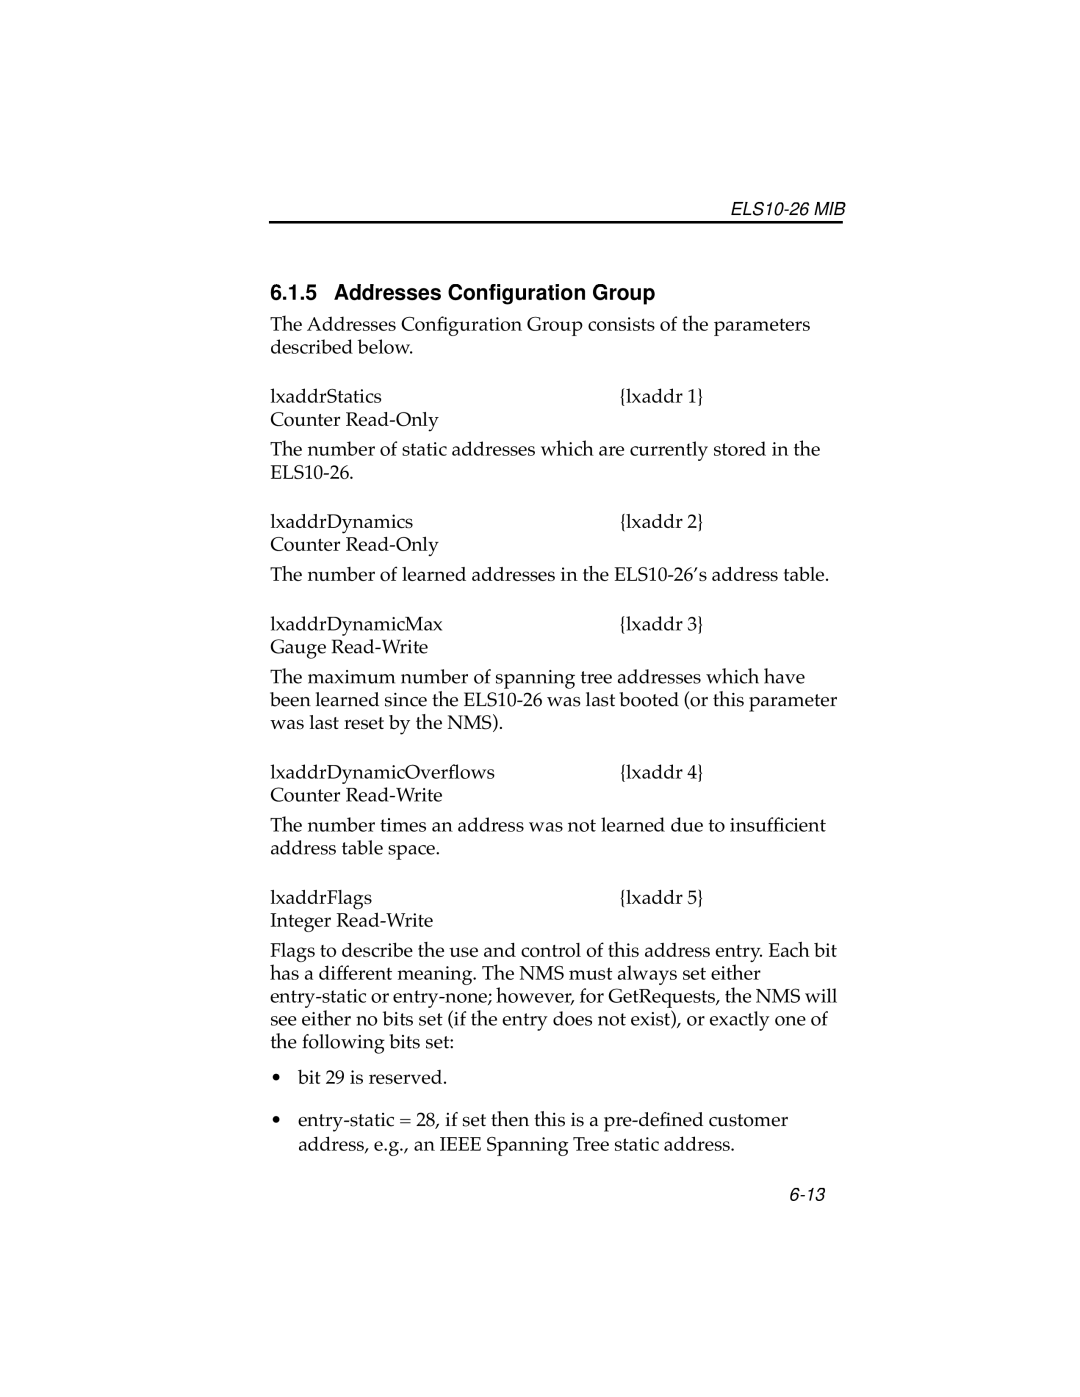 Cabletron Systems ELS10-26 manual Addresses Conﬁguration Group 